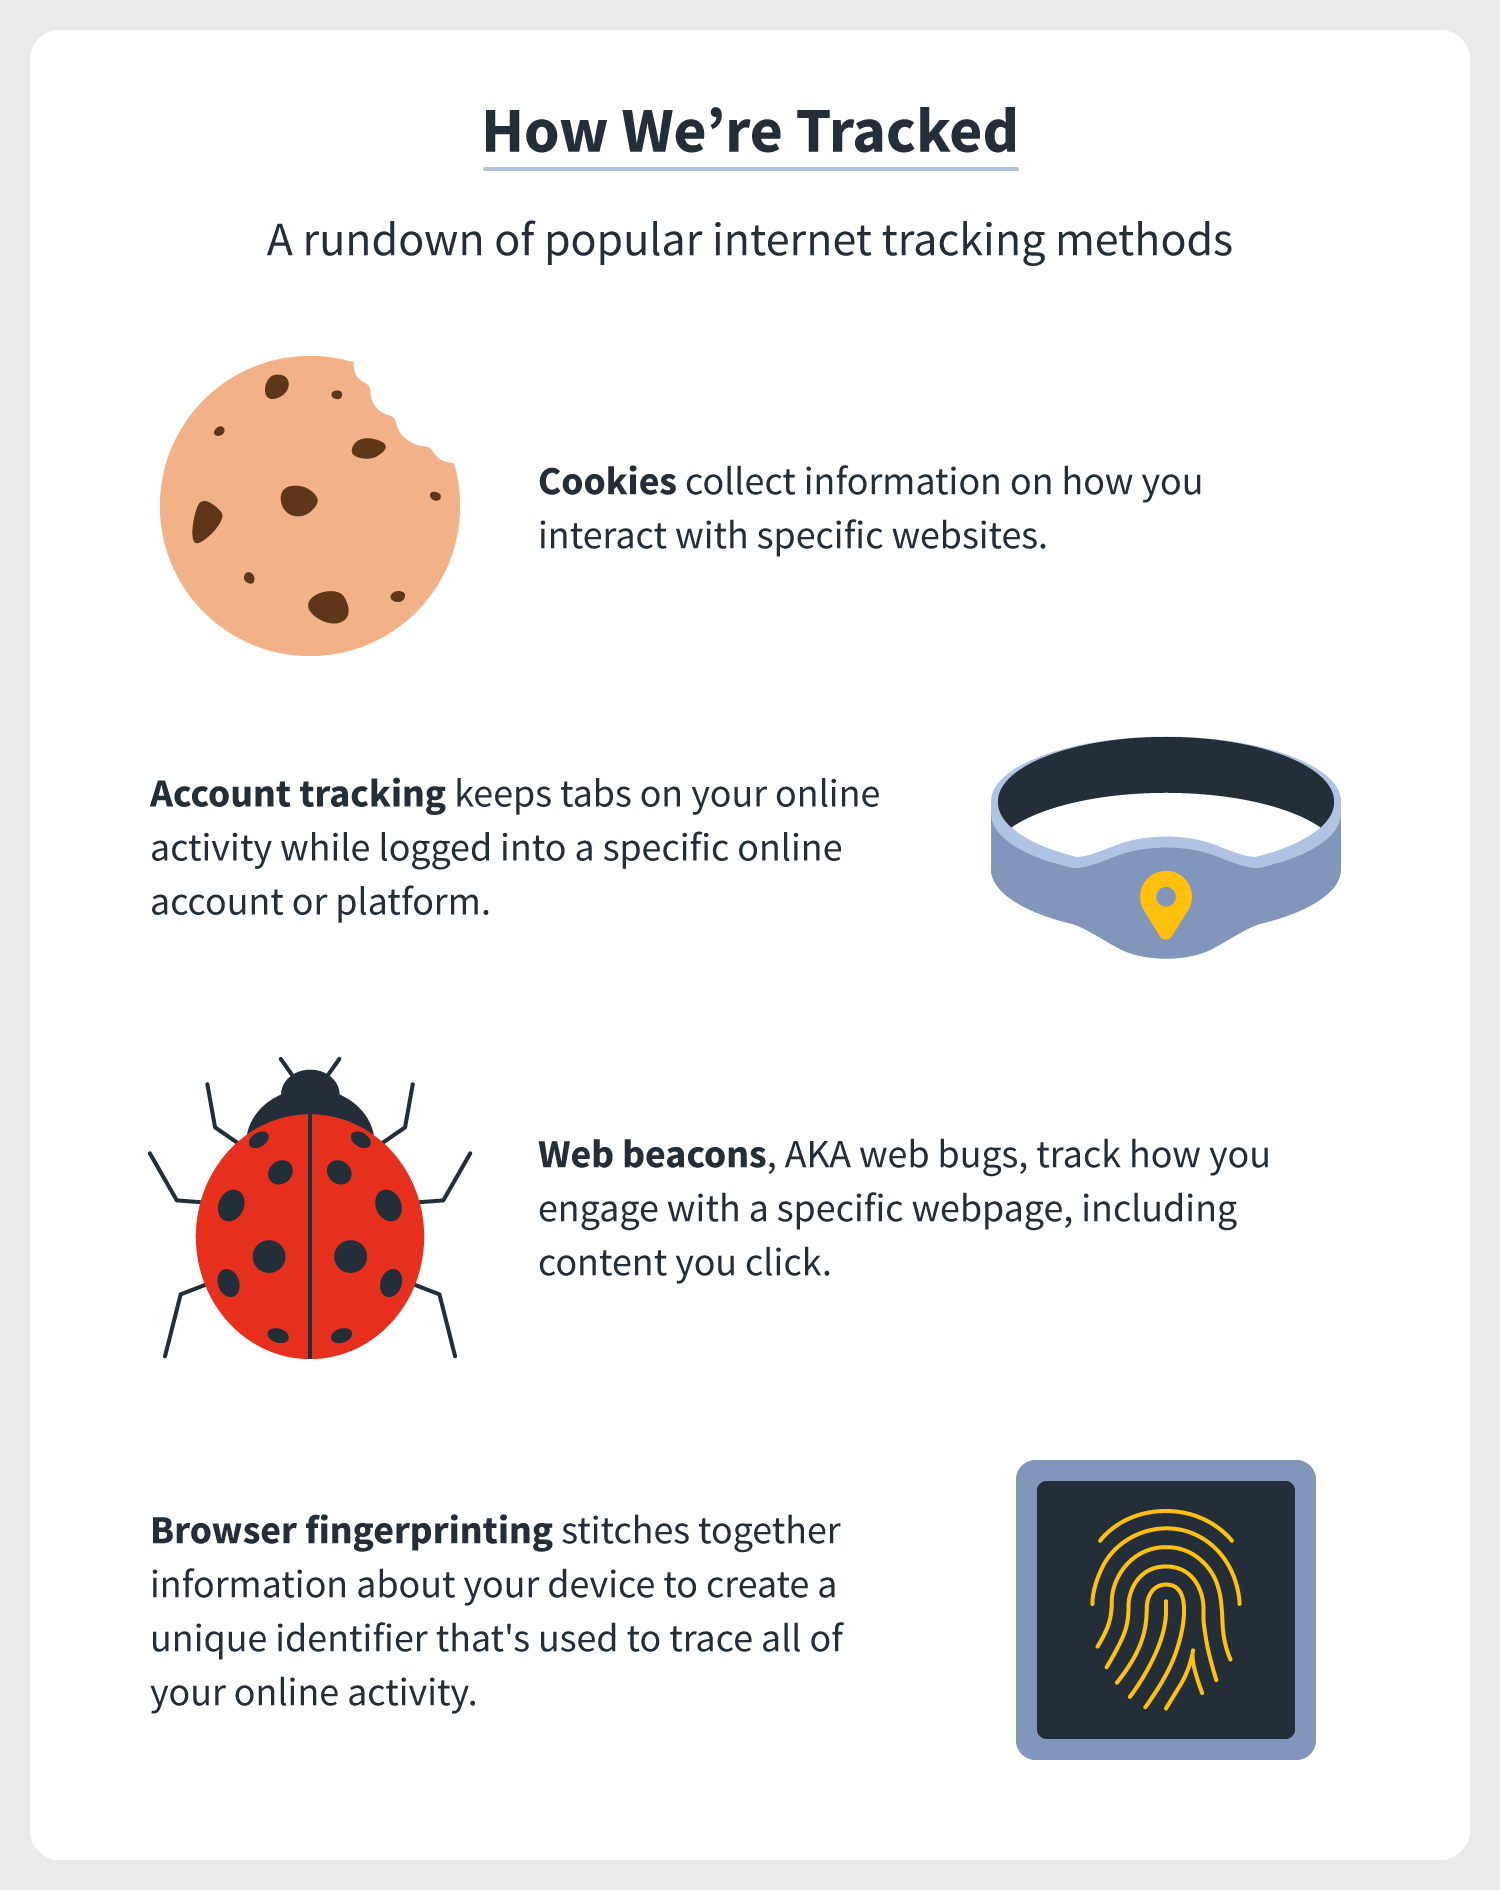 a cookie, a wristband, a bug, and a fingerprint help illustrate internet tracking methods like cookies, accounting tracking, web beacons, and browser fingerprinting, respectively